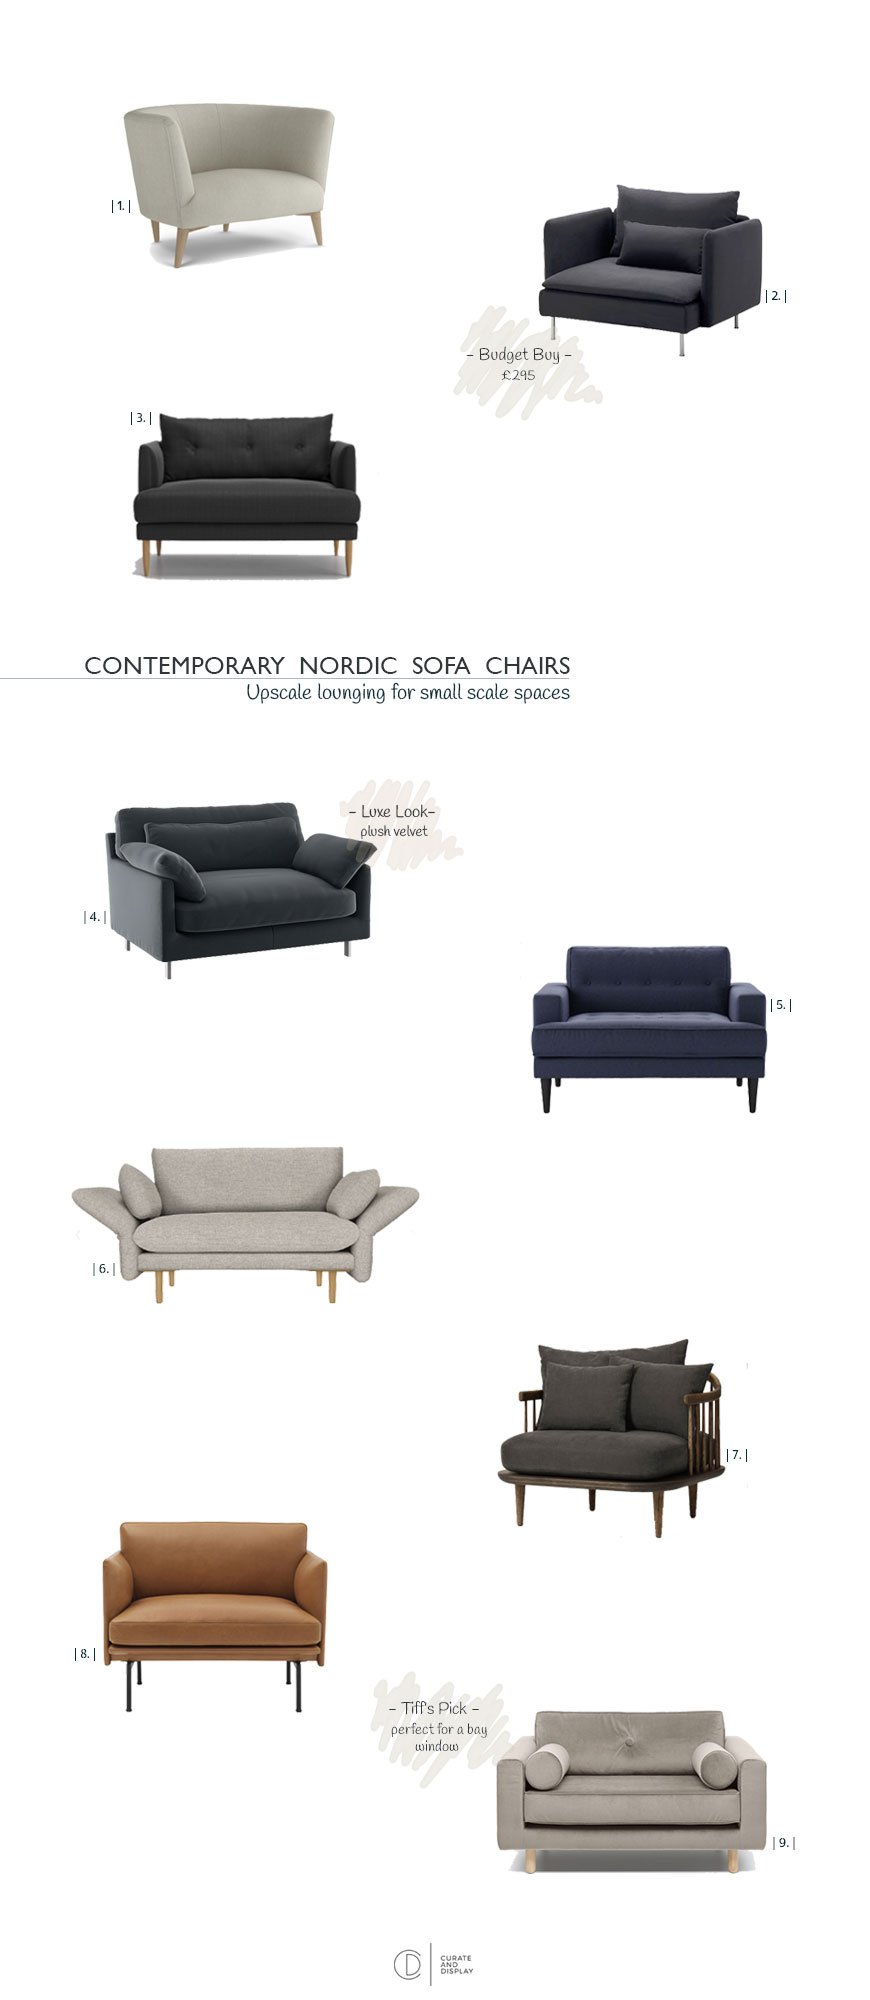 sofa chair shopping page, Nordic inspired seating, sofa chairs, snugglers, loveseats, contemporary furniture